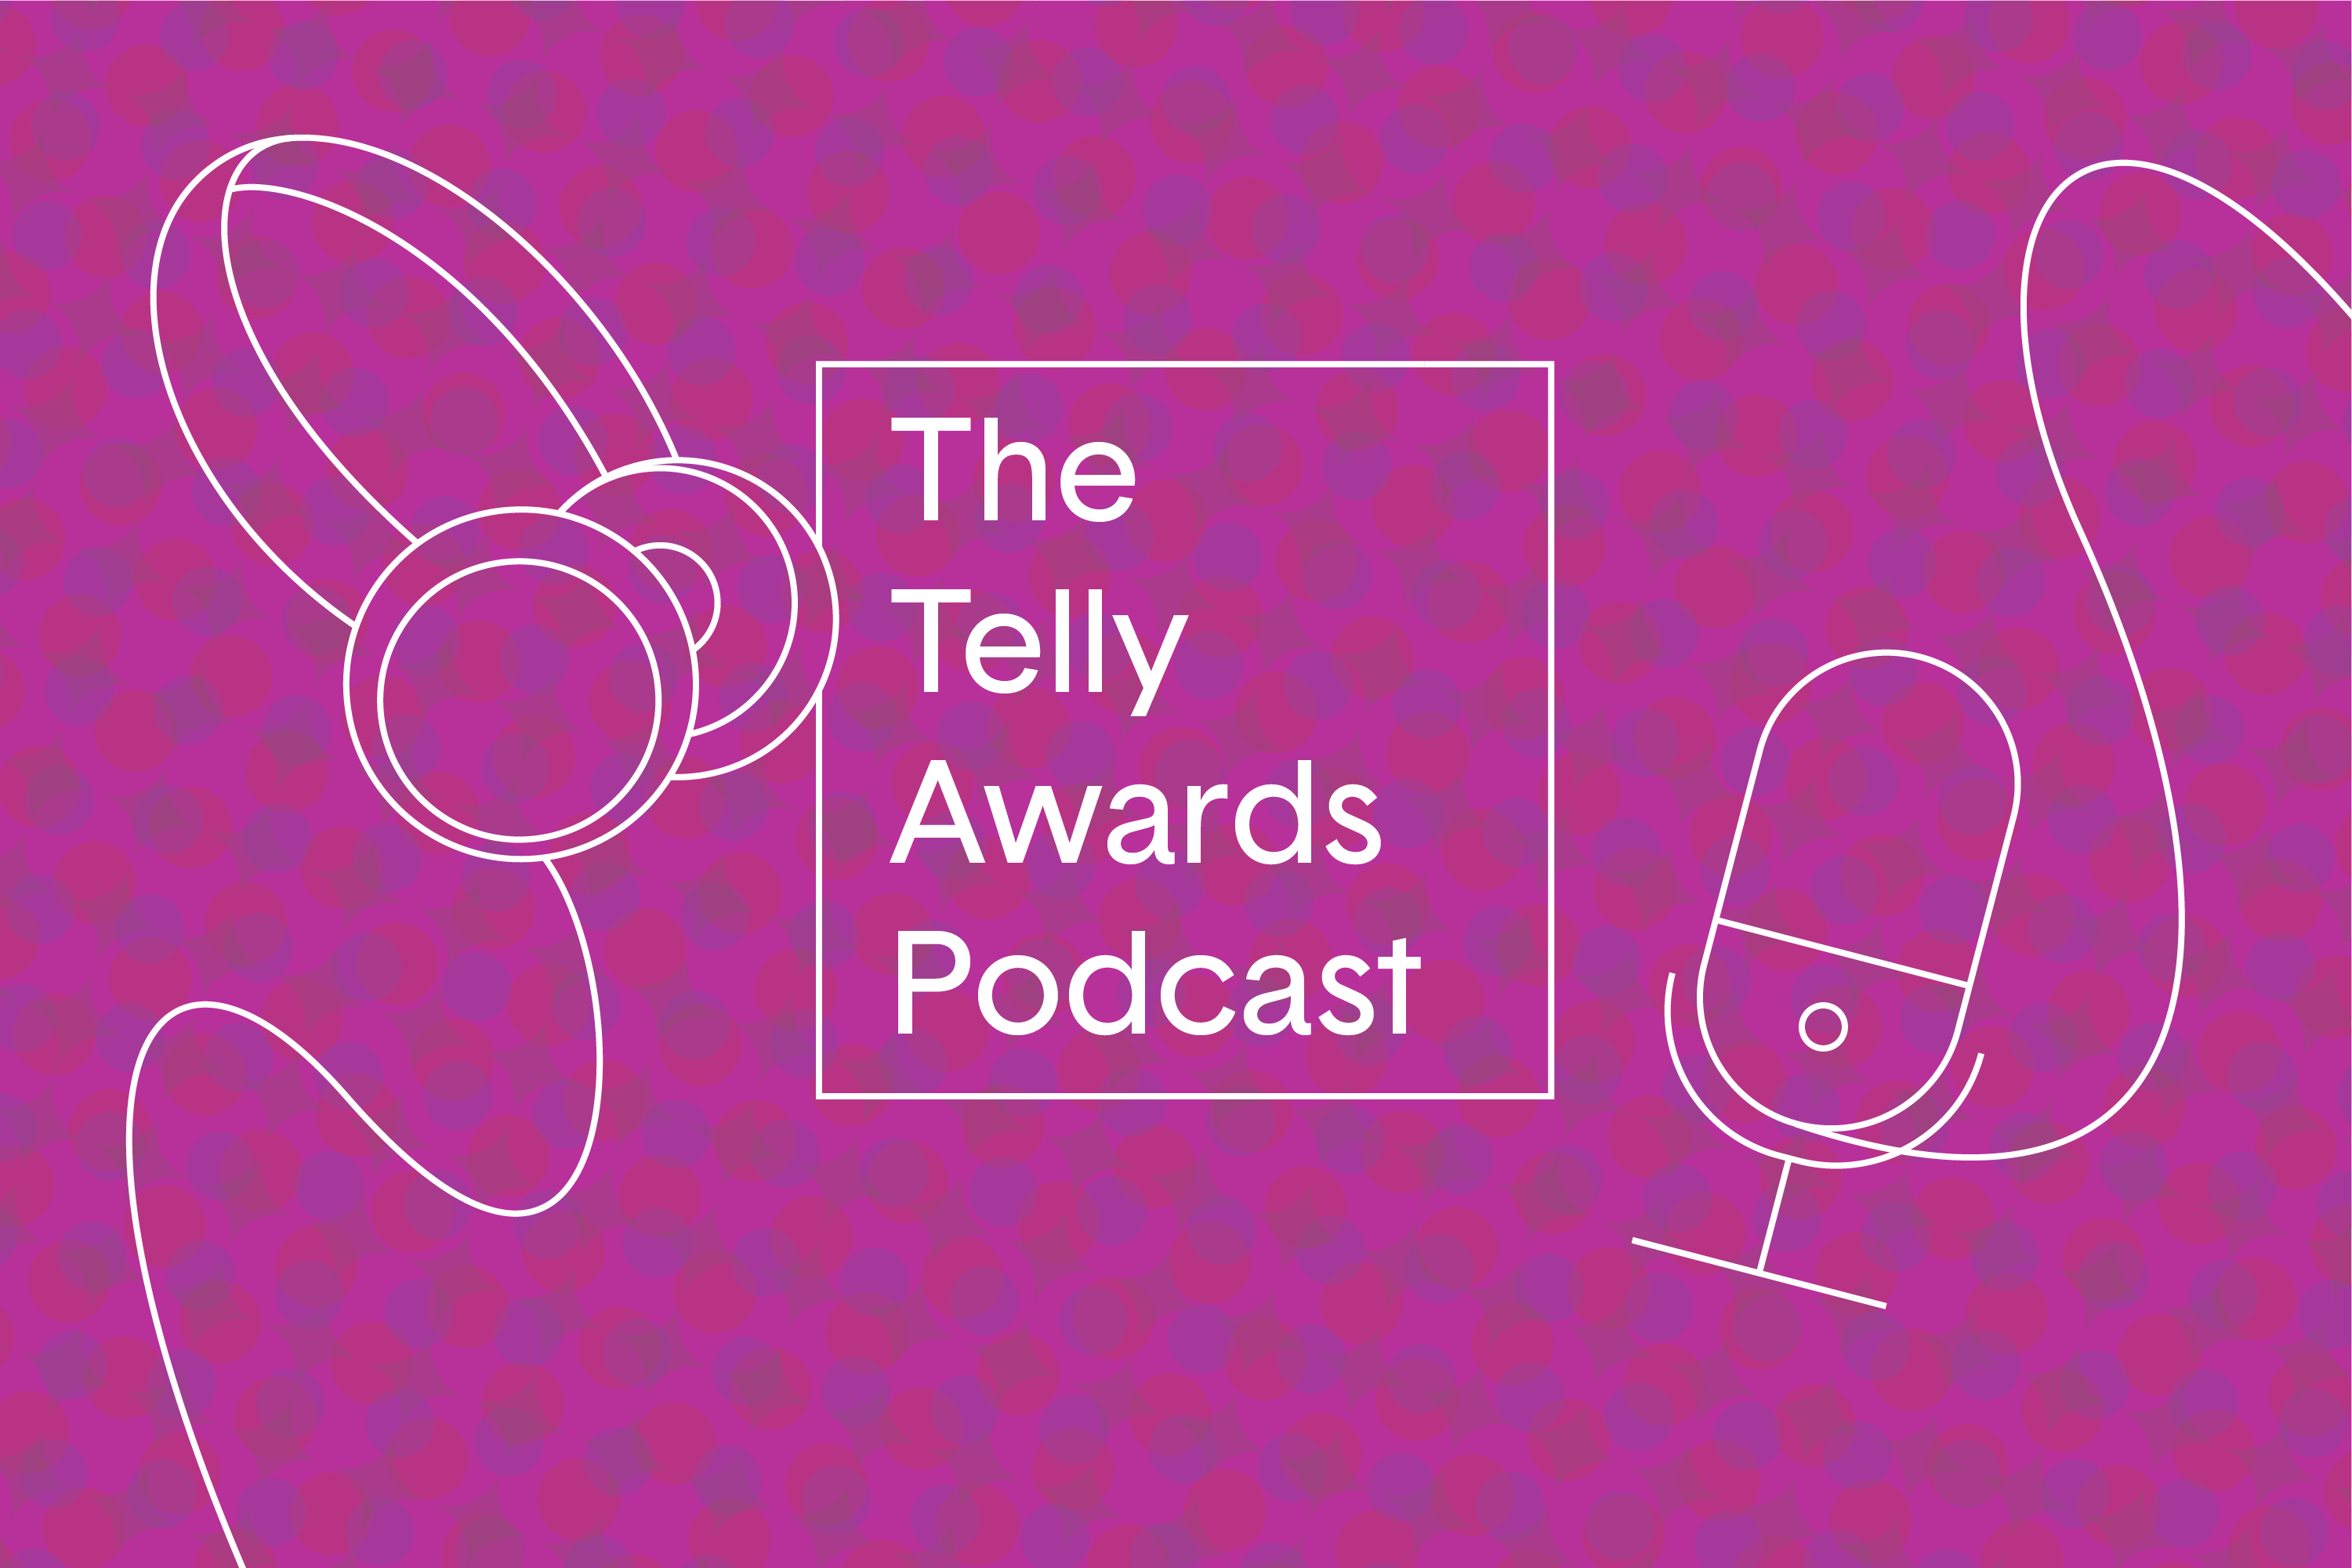 The Telly Awards Podcast Episode 2: Branded Content